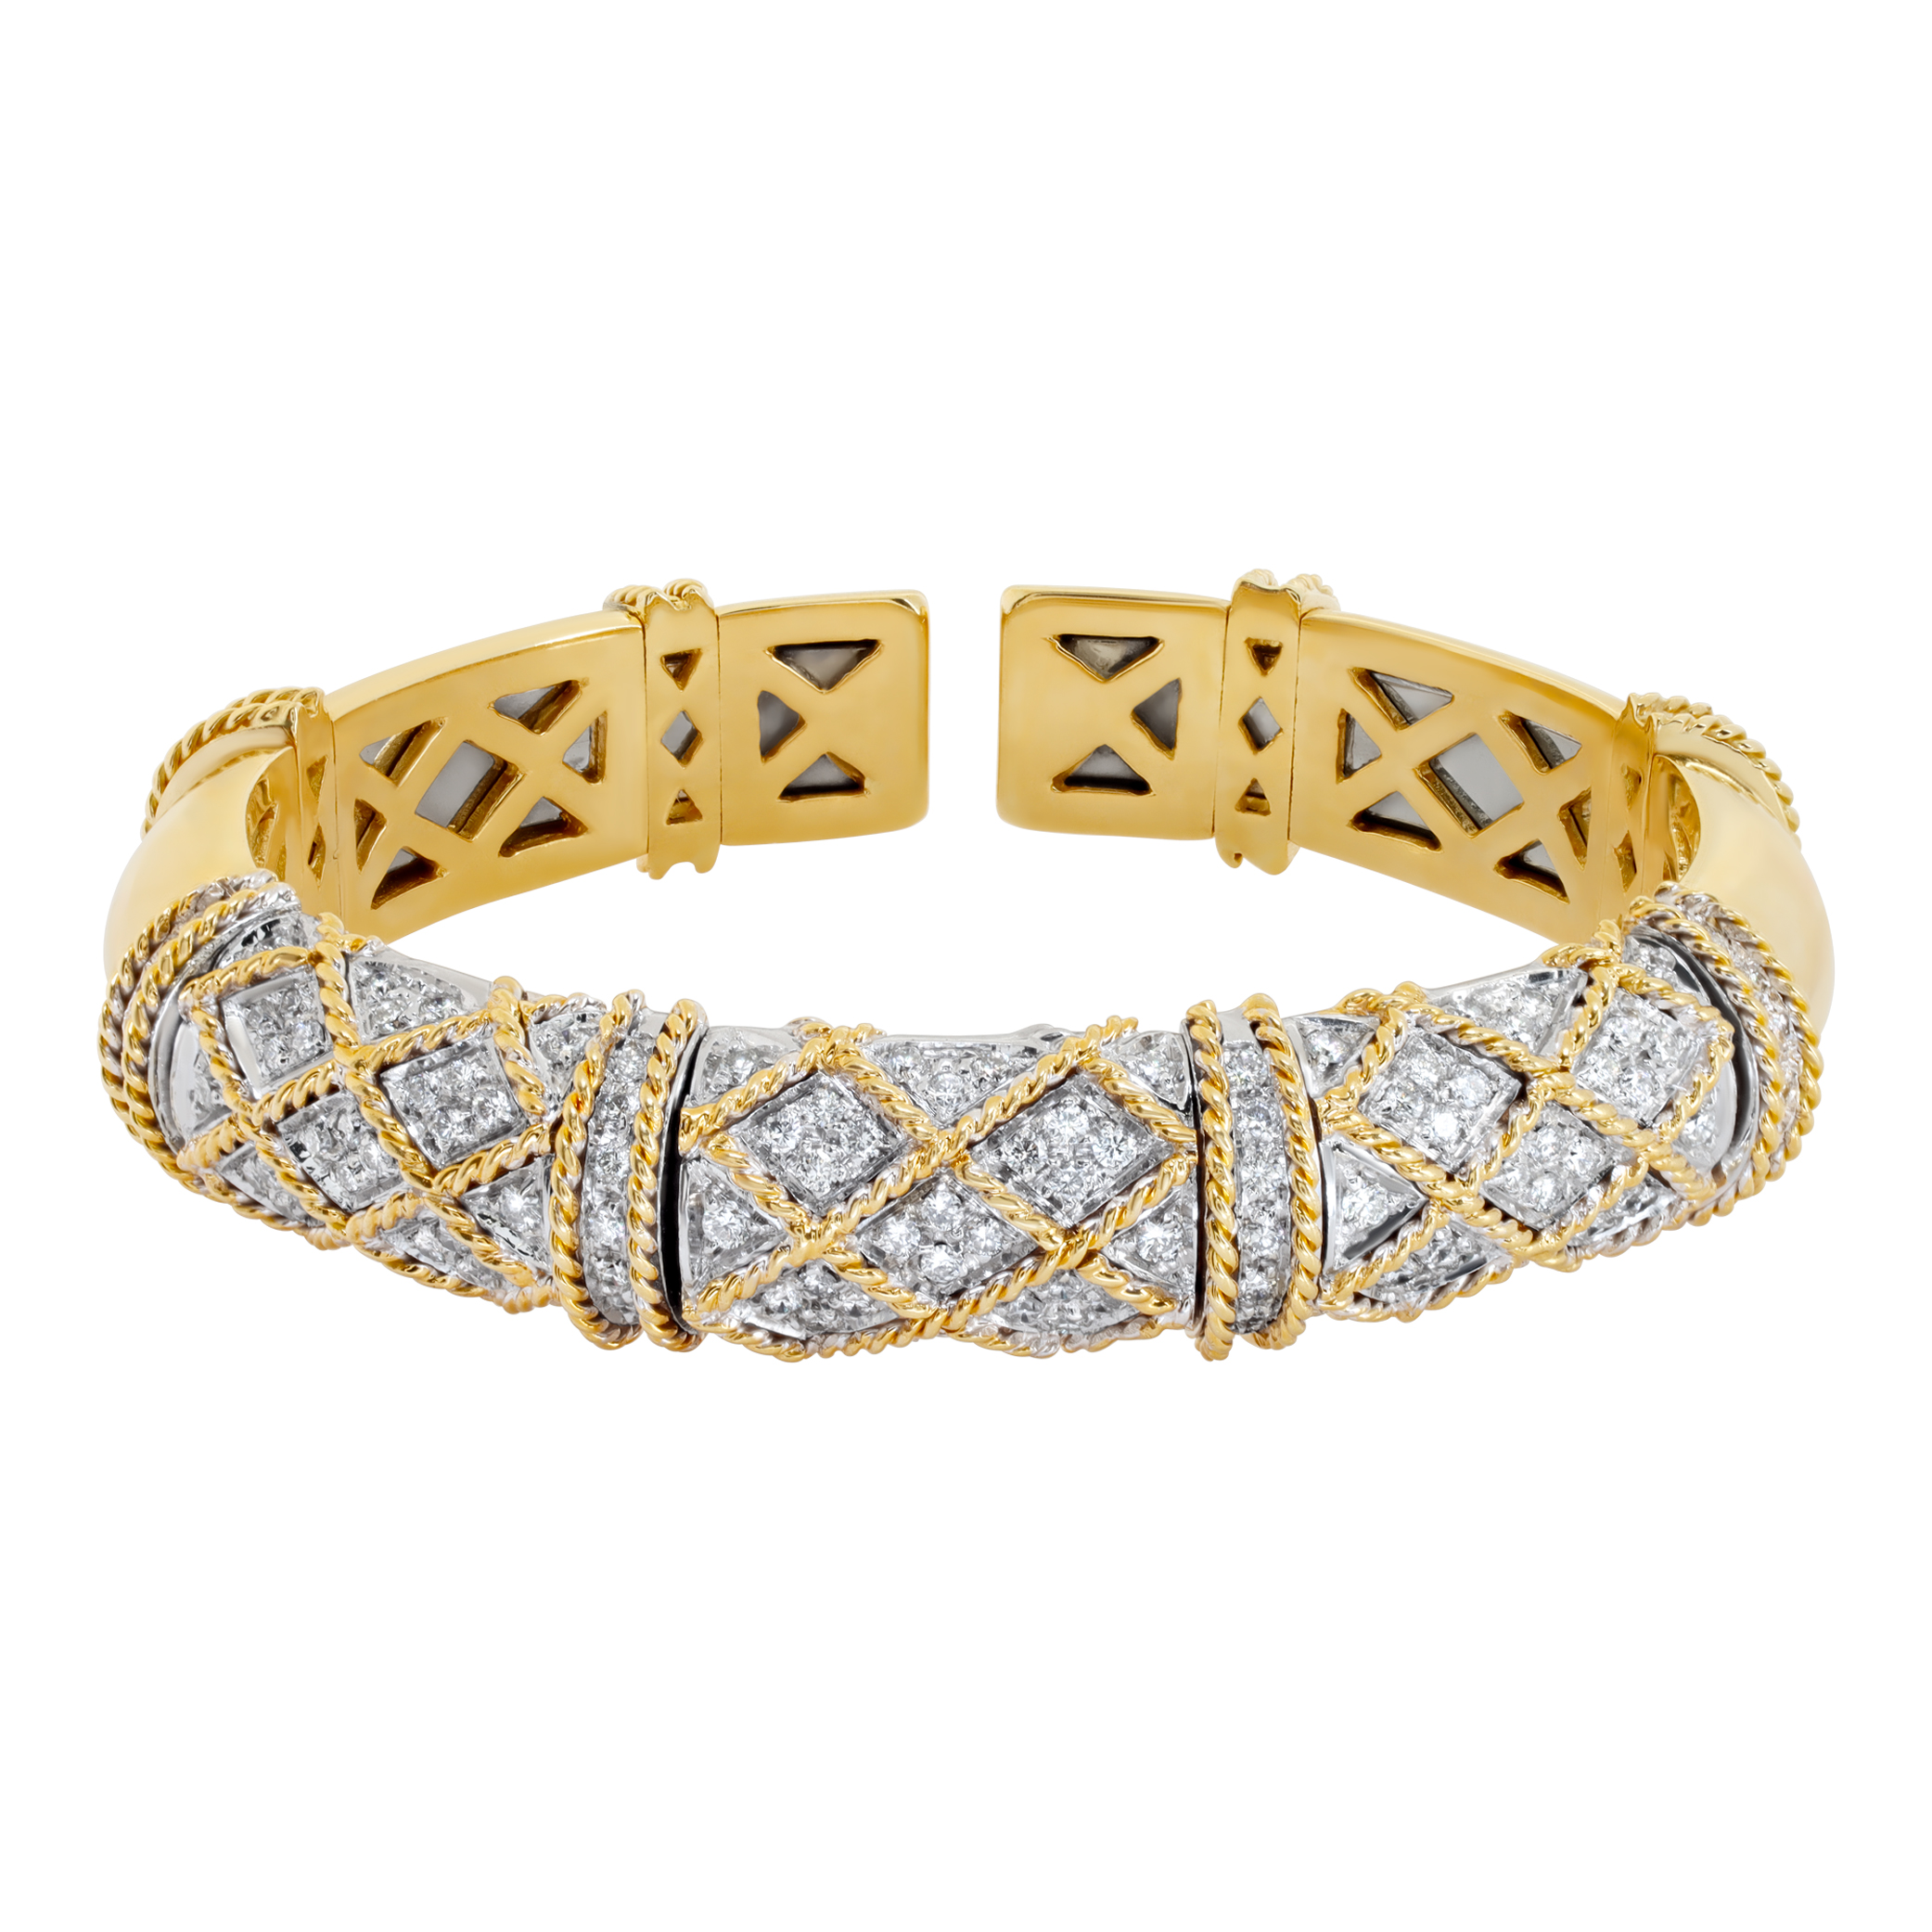 Etruscan revival, solid diamonds cuff bangle in 18K yellow gold, made in Italy. Round brilliant cut diamonds total approx. weight, over 2.00 carats. (Stones)